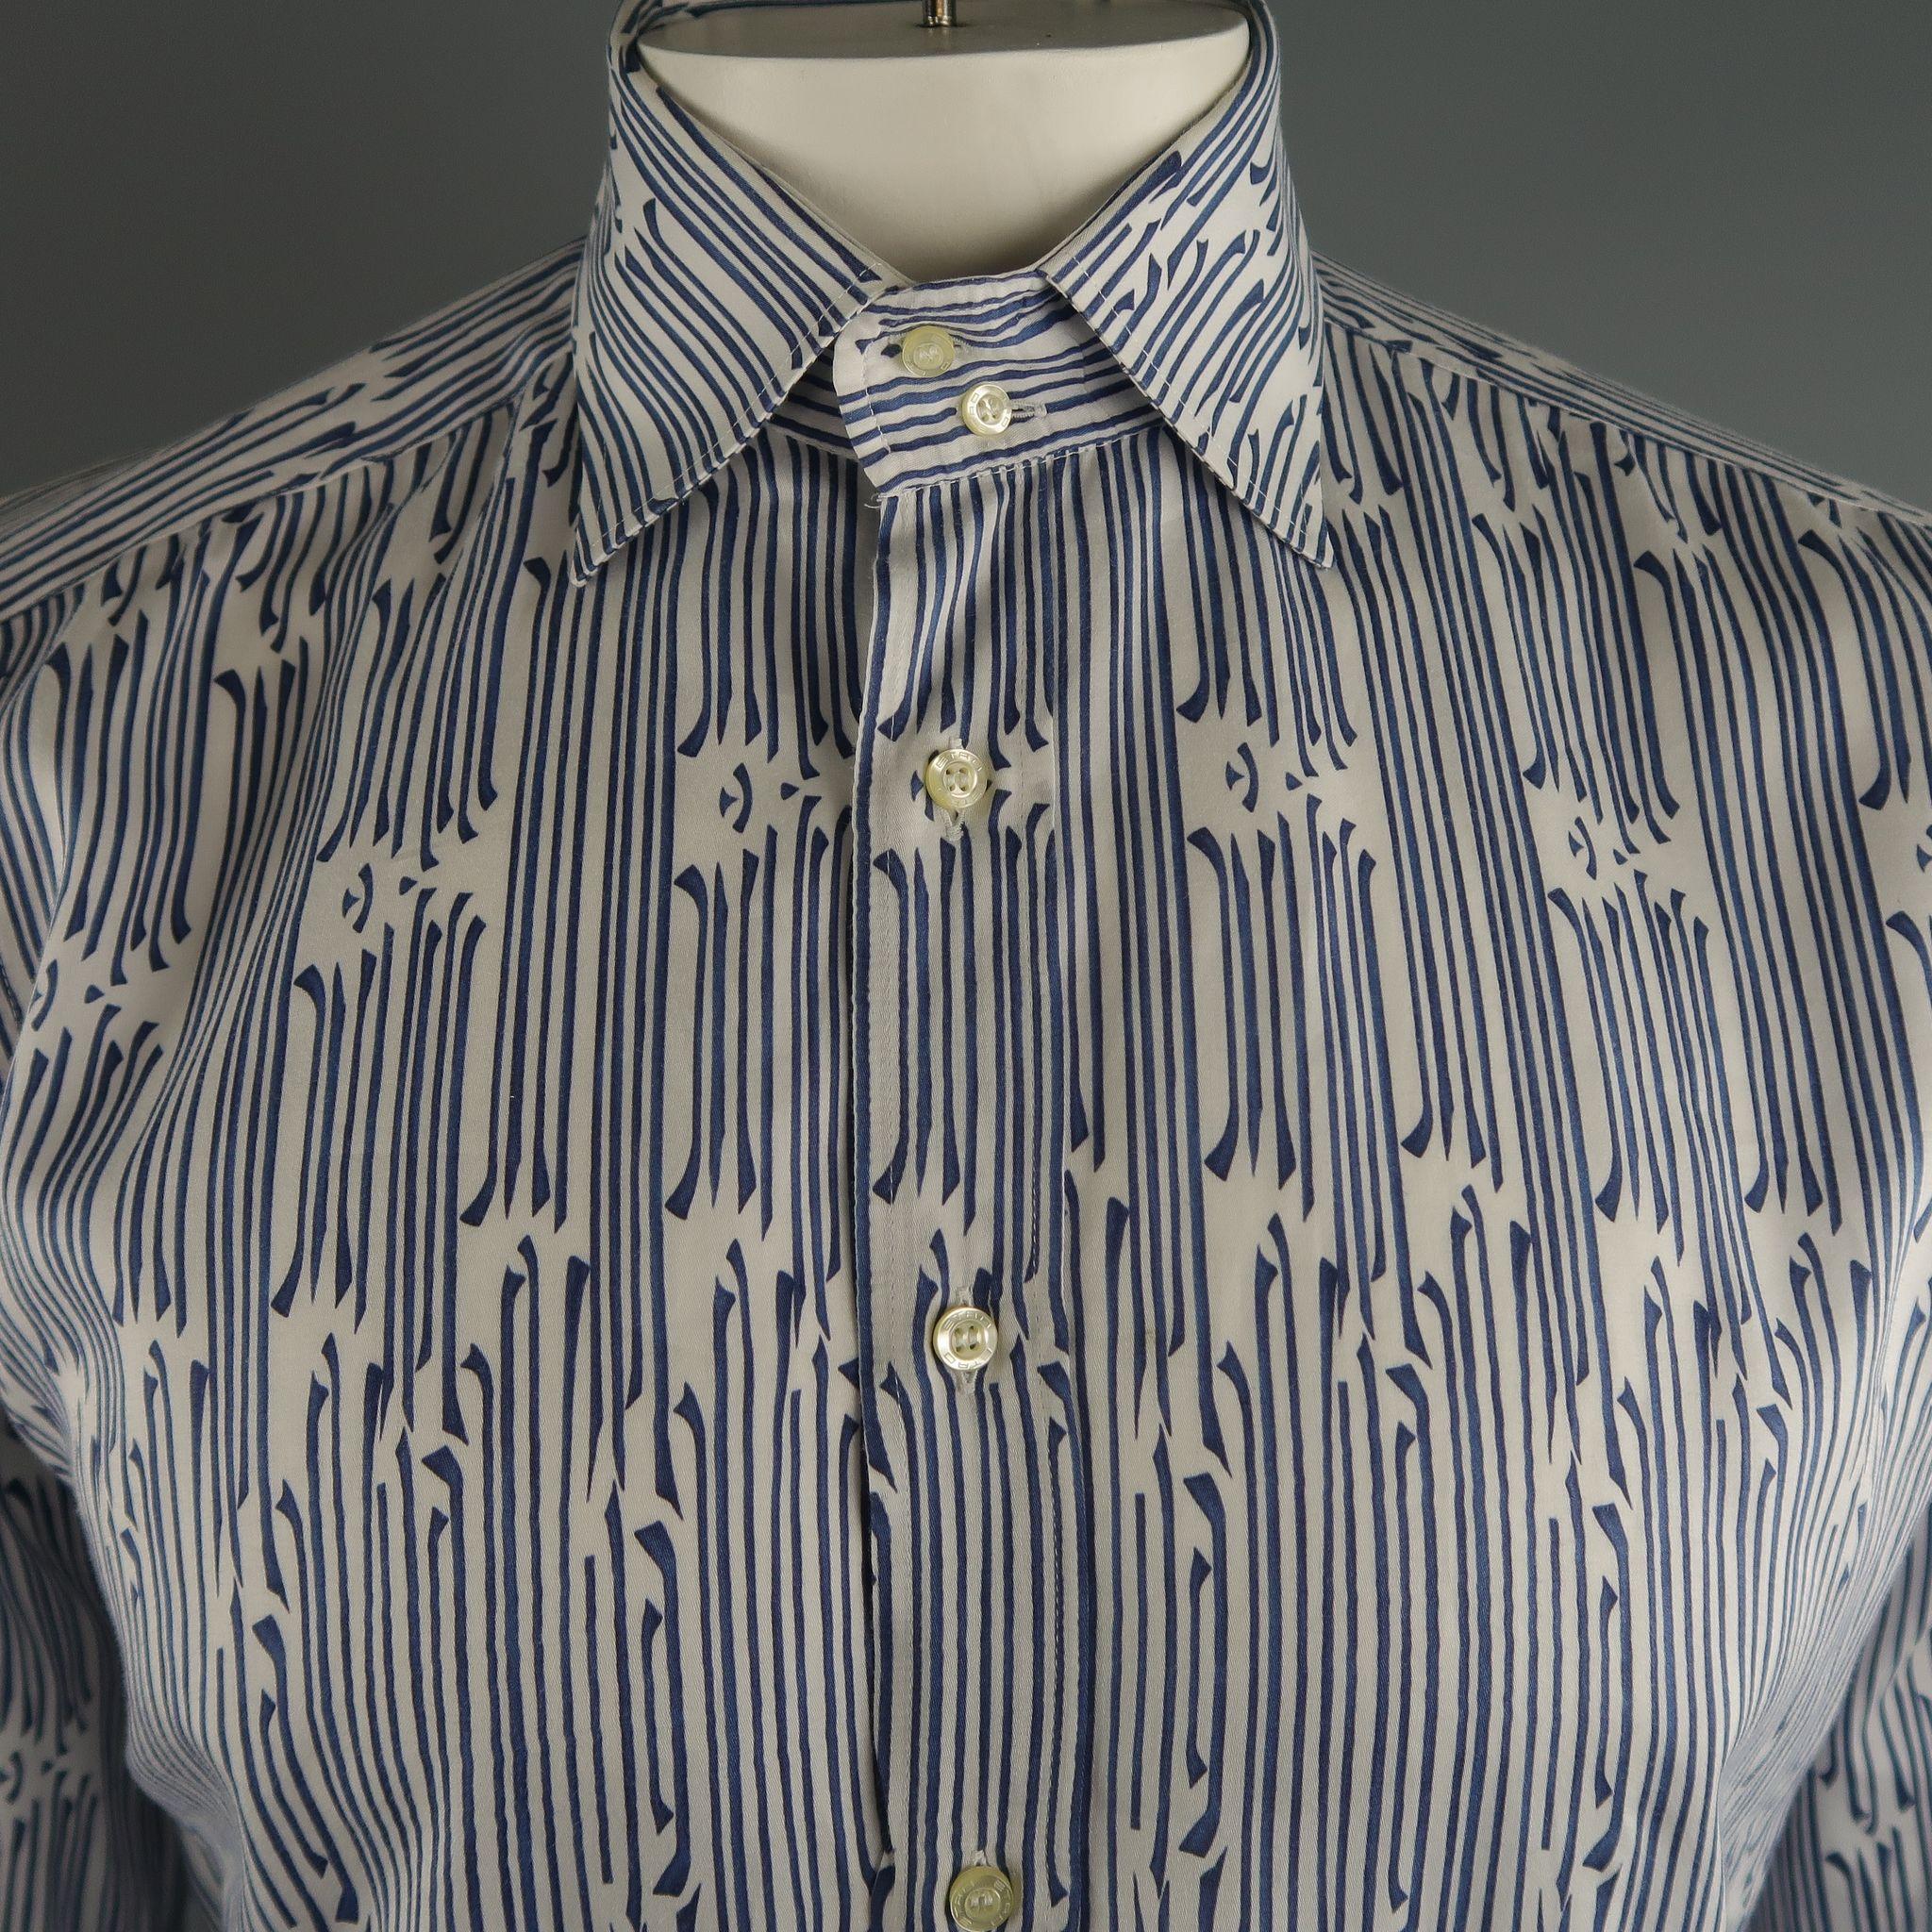 ETRO long sleeve shirt comes in navy and white tones  in printed cotton material, button up. Made in Italy.
 
Excellent Pre-Owned Condition.
Marked: 41
 
Measurements:
 
Shoulder: 16.5  in.
Chest: 46  in.
Sleeve: 24  in.
Length:  31  in.